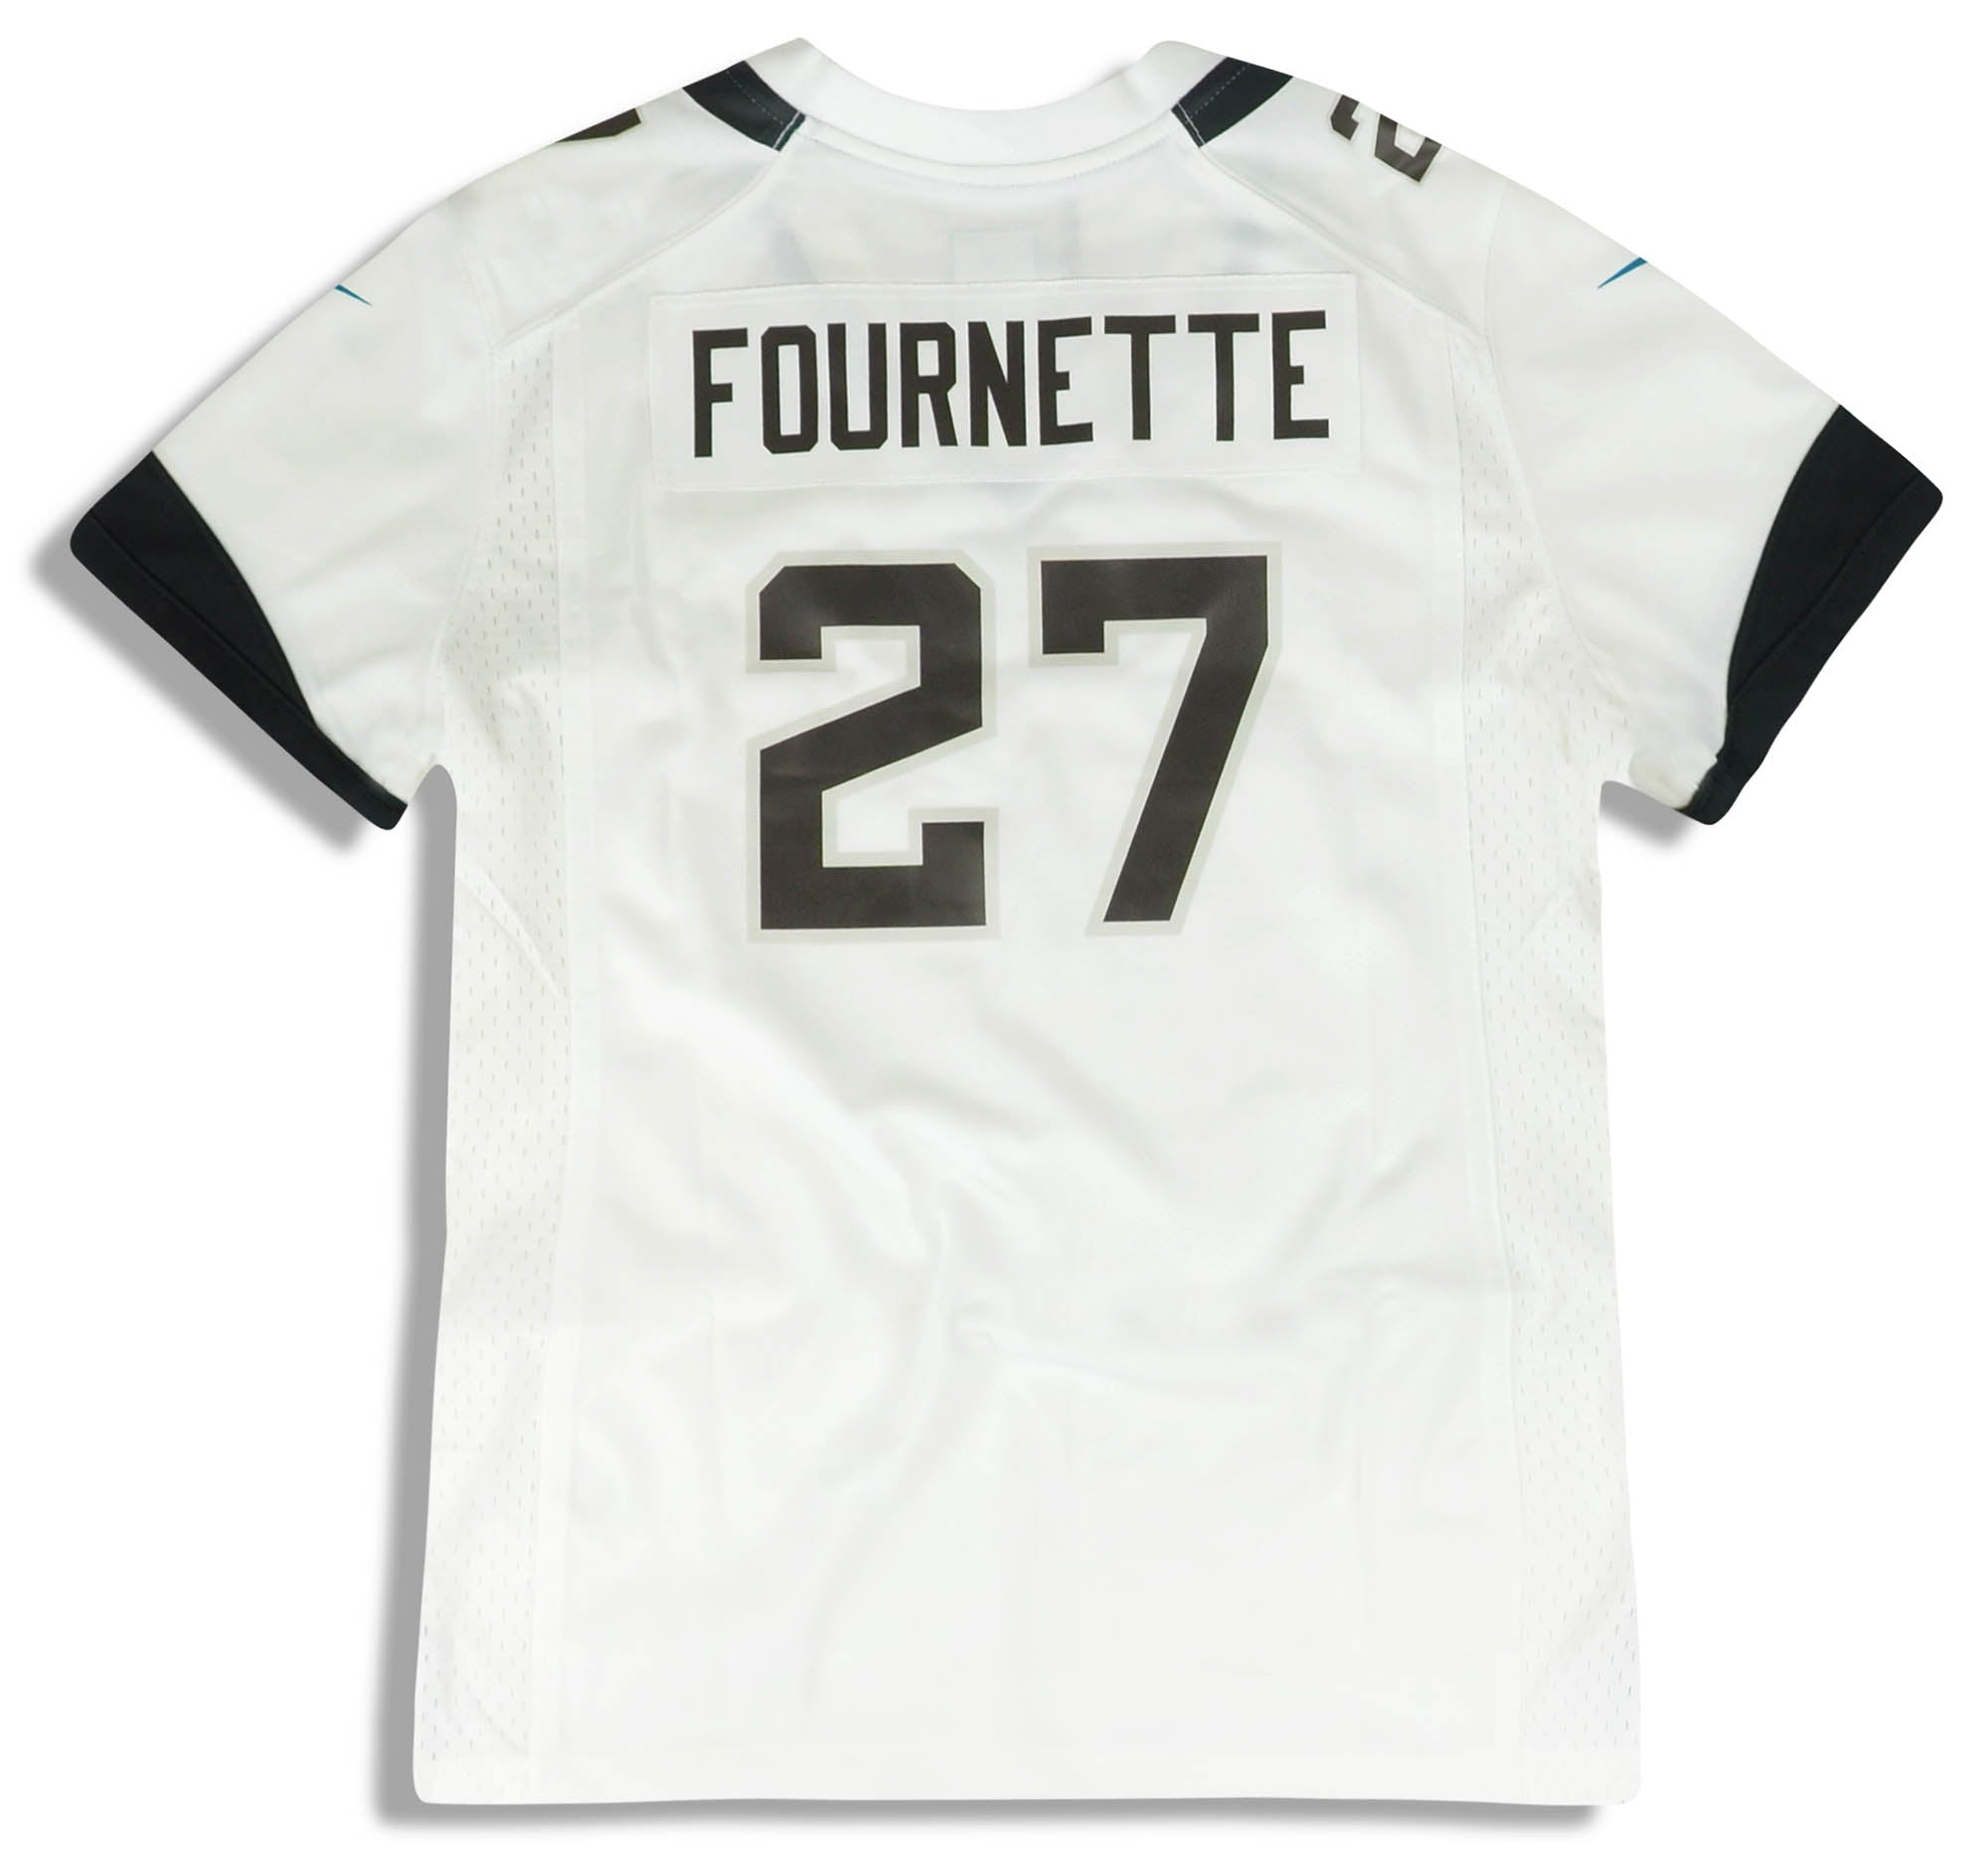 2018 JACKSONVILLE JAGUARS FOURNETTE #27 NIKE GAME JERSEY (AWAY) WOMENS (S) - W/TAGS